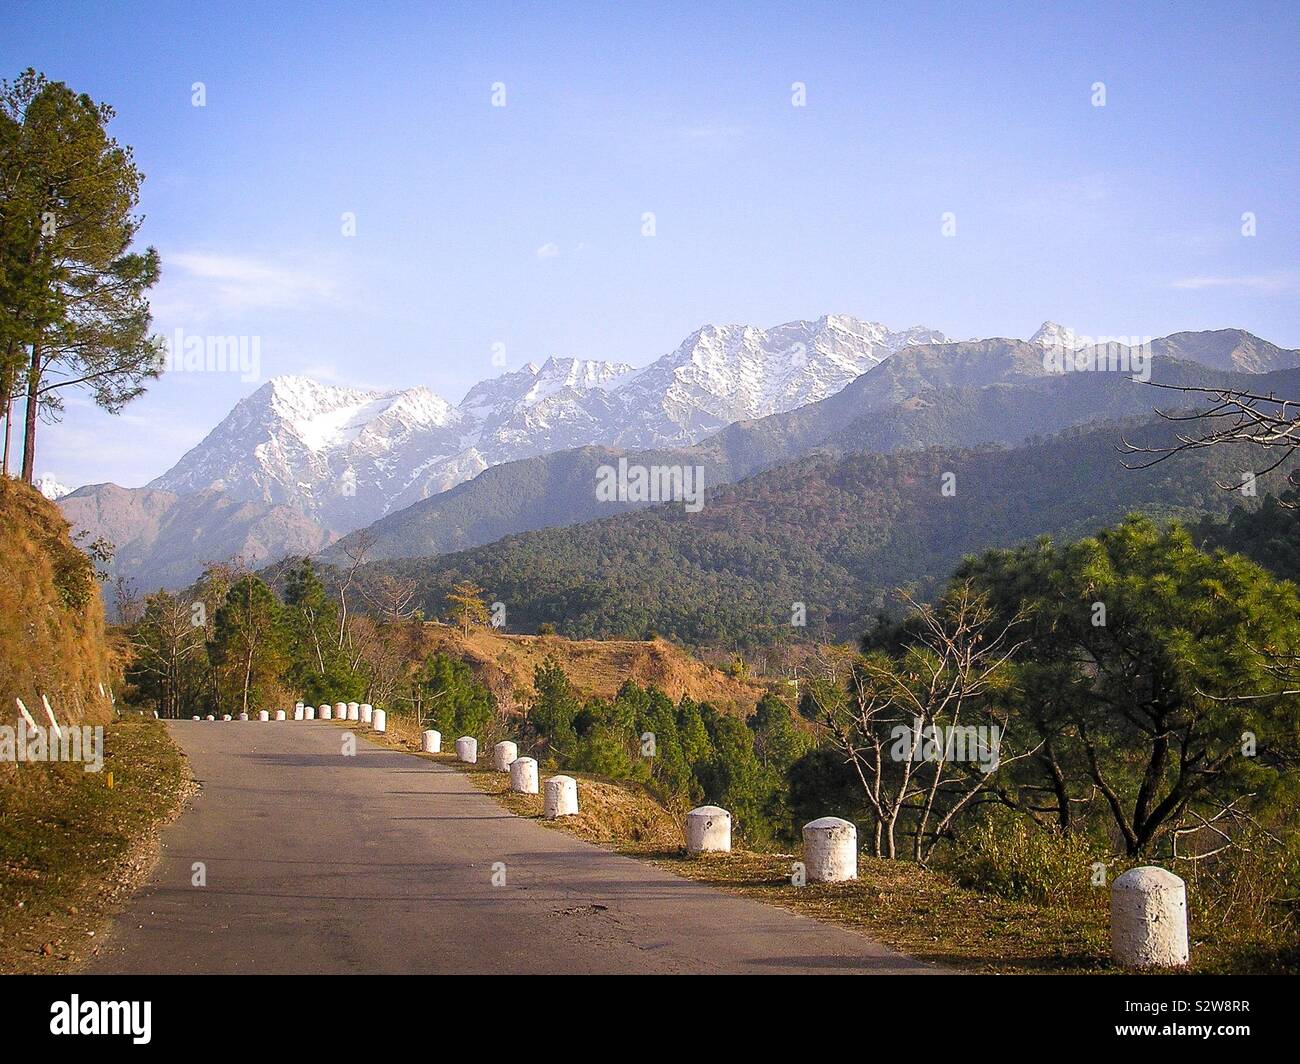 Rural road with Dhauladhar mountain ranges in the Himalayan foothills in background, in remote northern India near Dharamsala, Himachal Pradesh Stock Photo